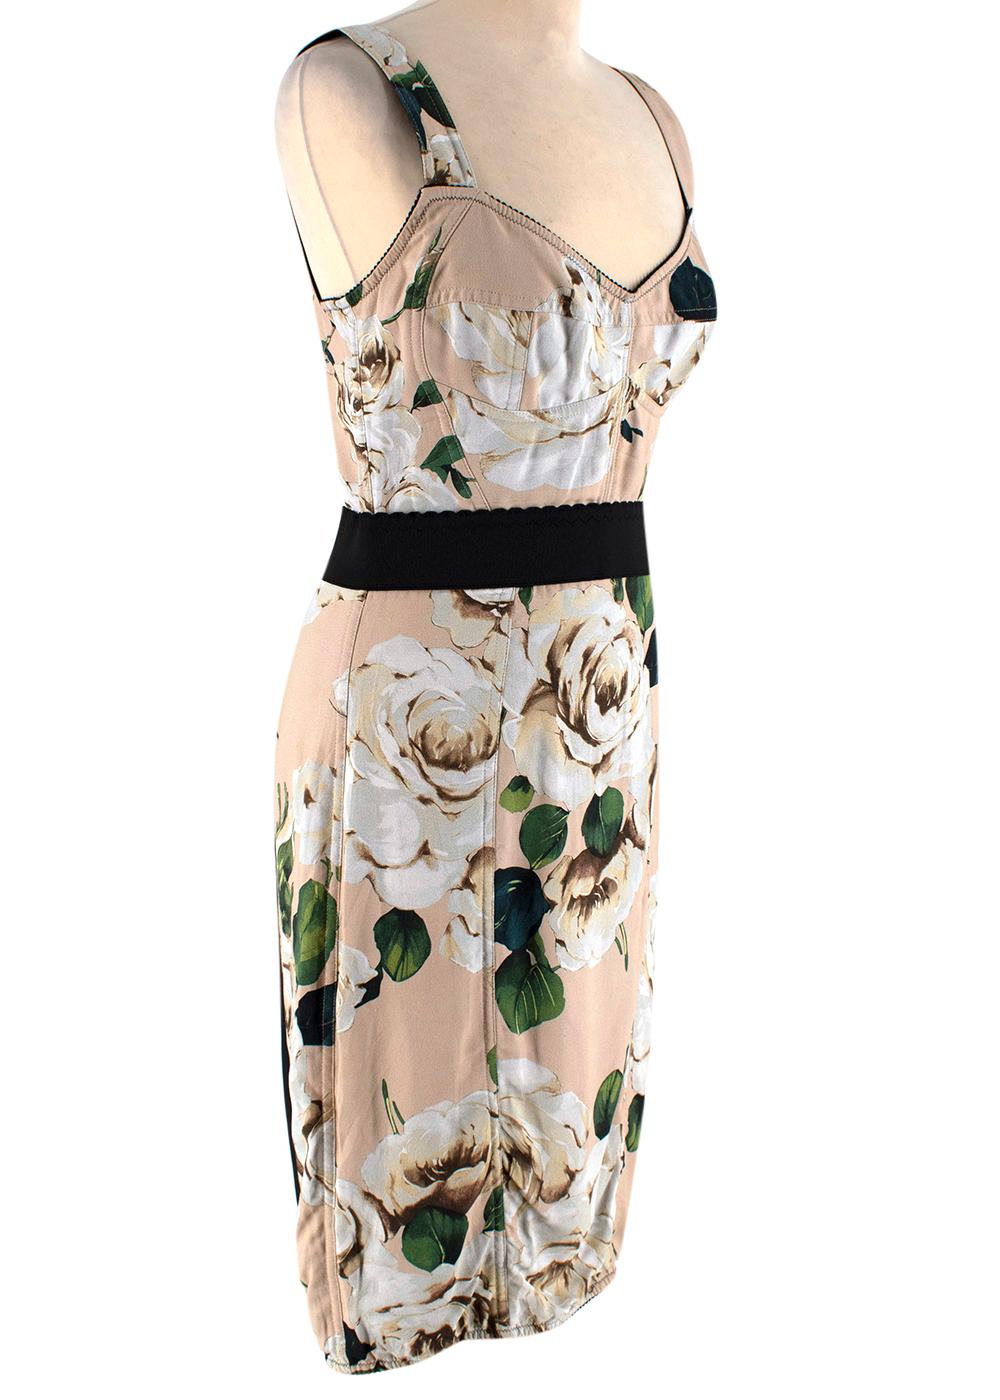 Dolce & Gabbana Peach Floral Bustier Dress

- Sleeveless dress with floral print in nude tones
- Structured around the upper bodice
- Black elasticated waistline and hemlines
- Fitted pencil skirt 
- Black panelling on the back of dress
- Zip